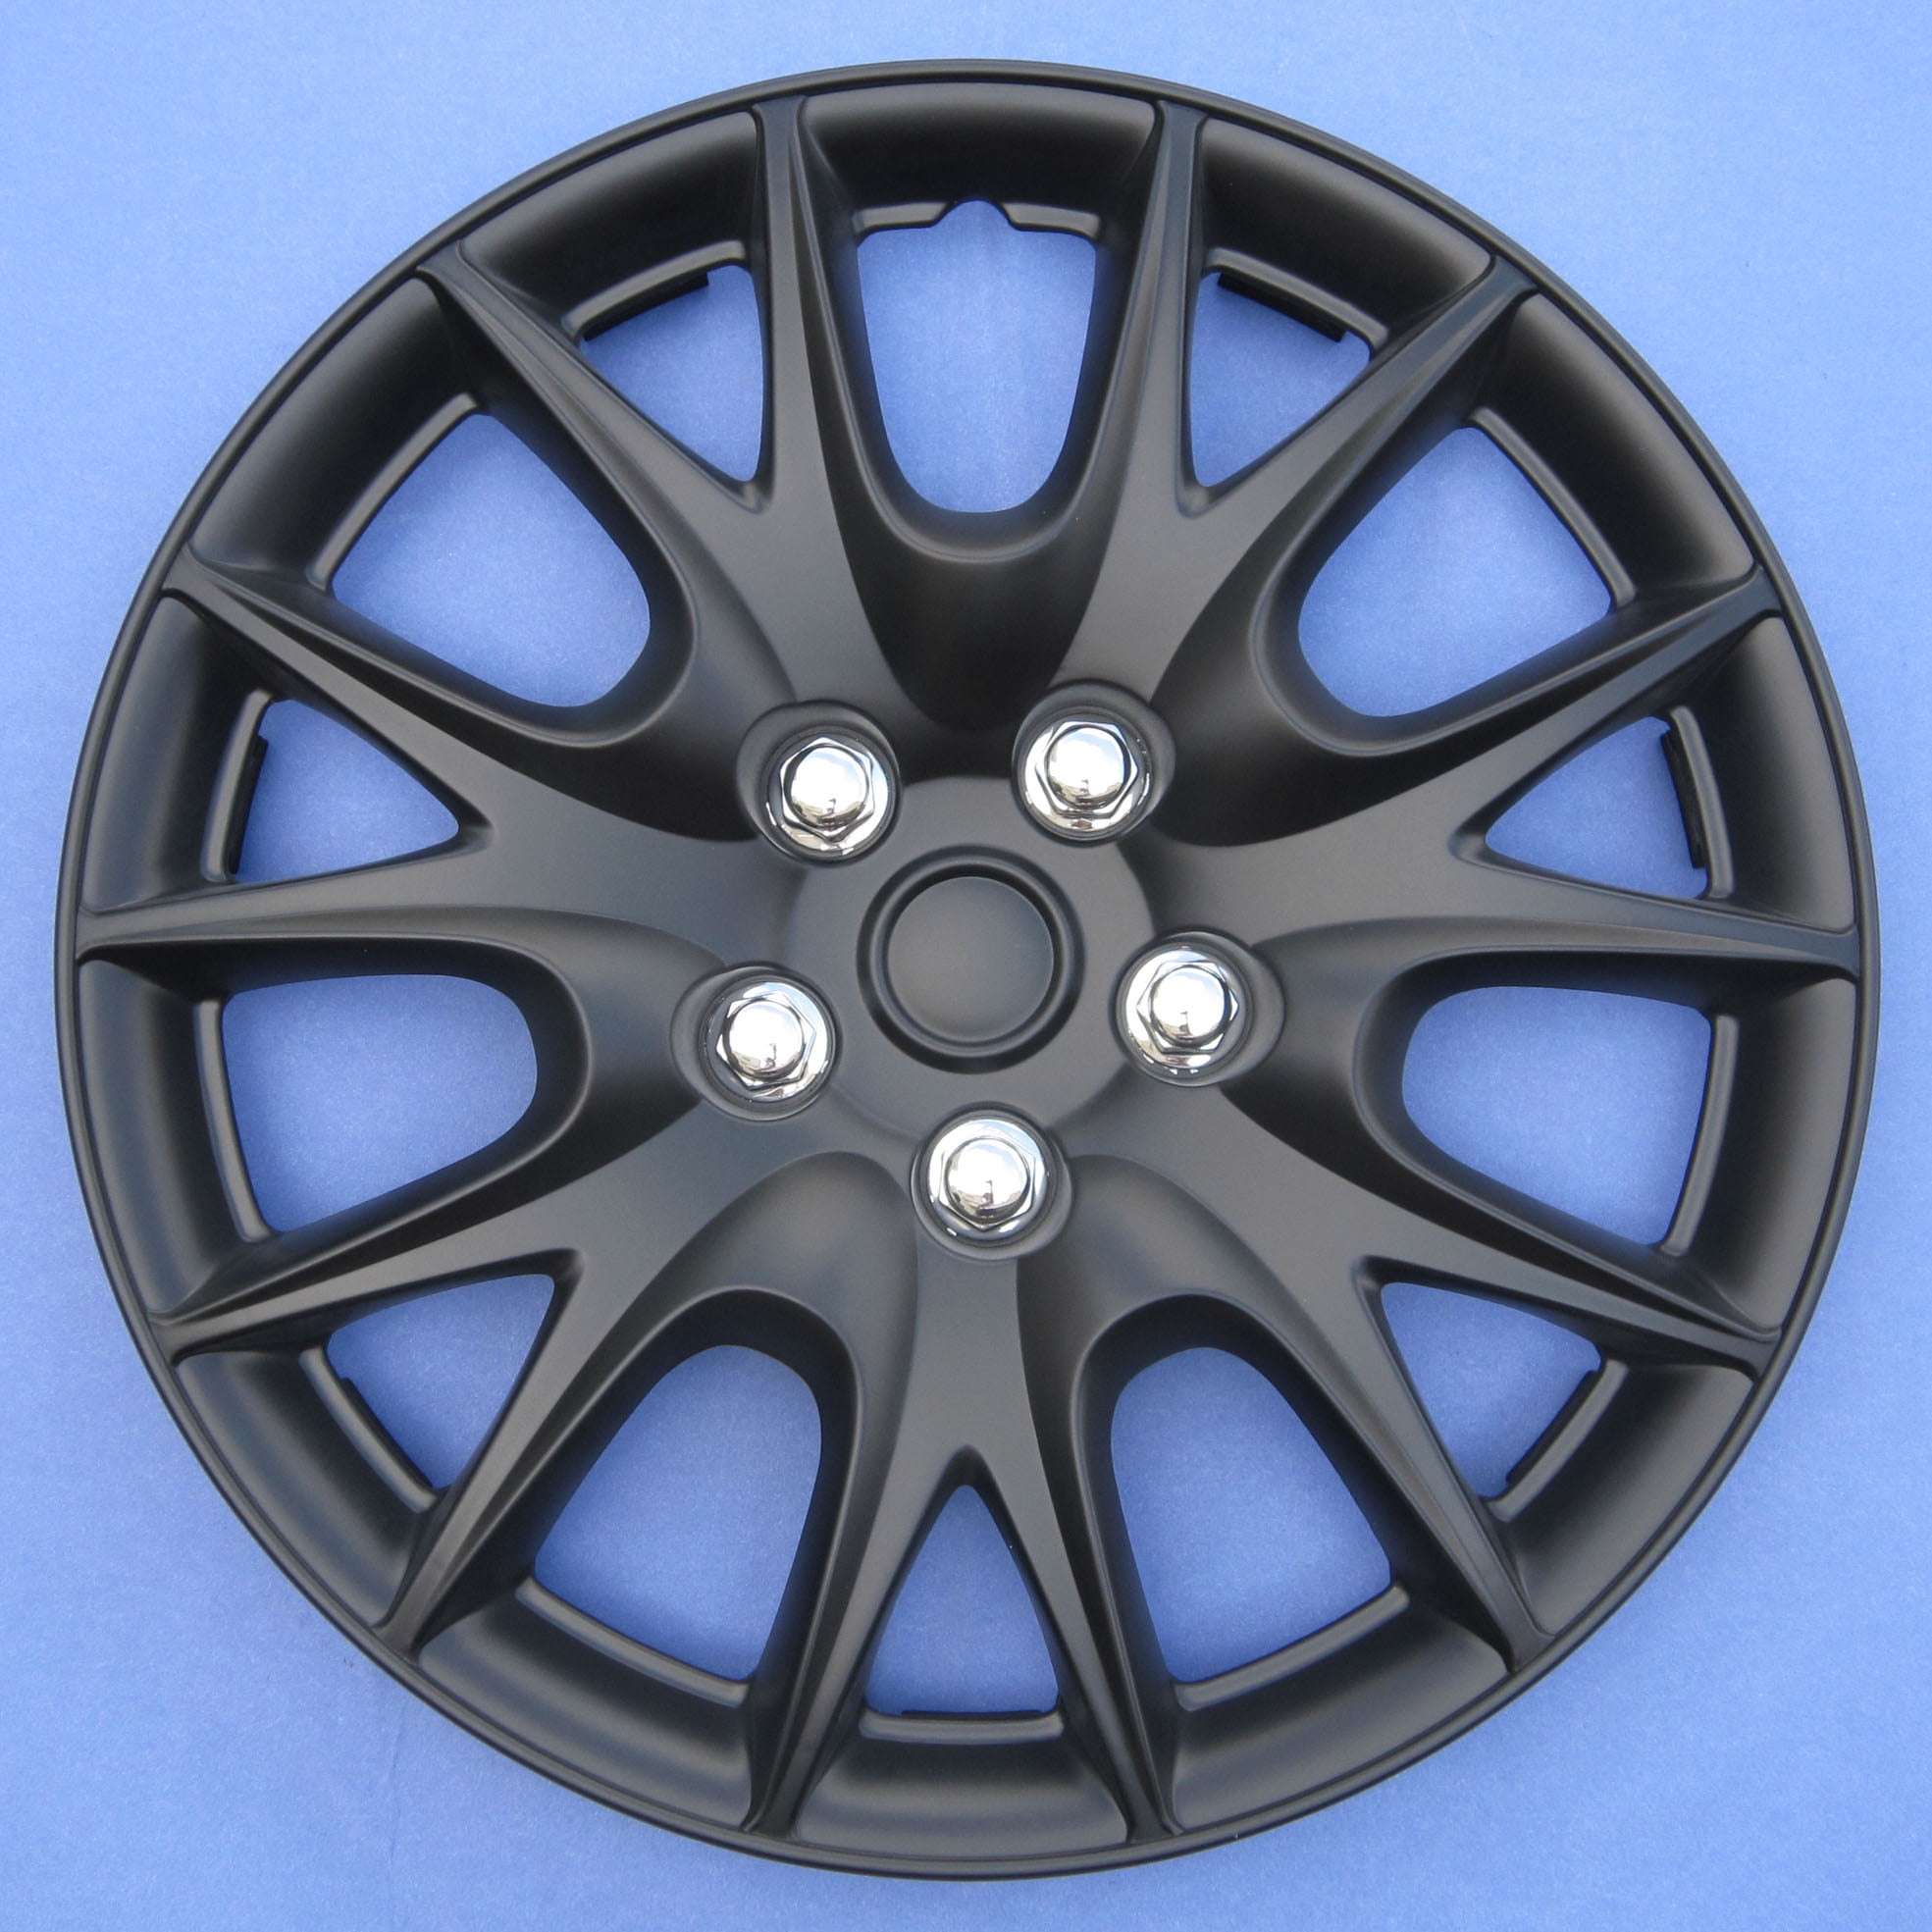 Auto Drive 16-in Wheel Cover, KT950-16MBK